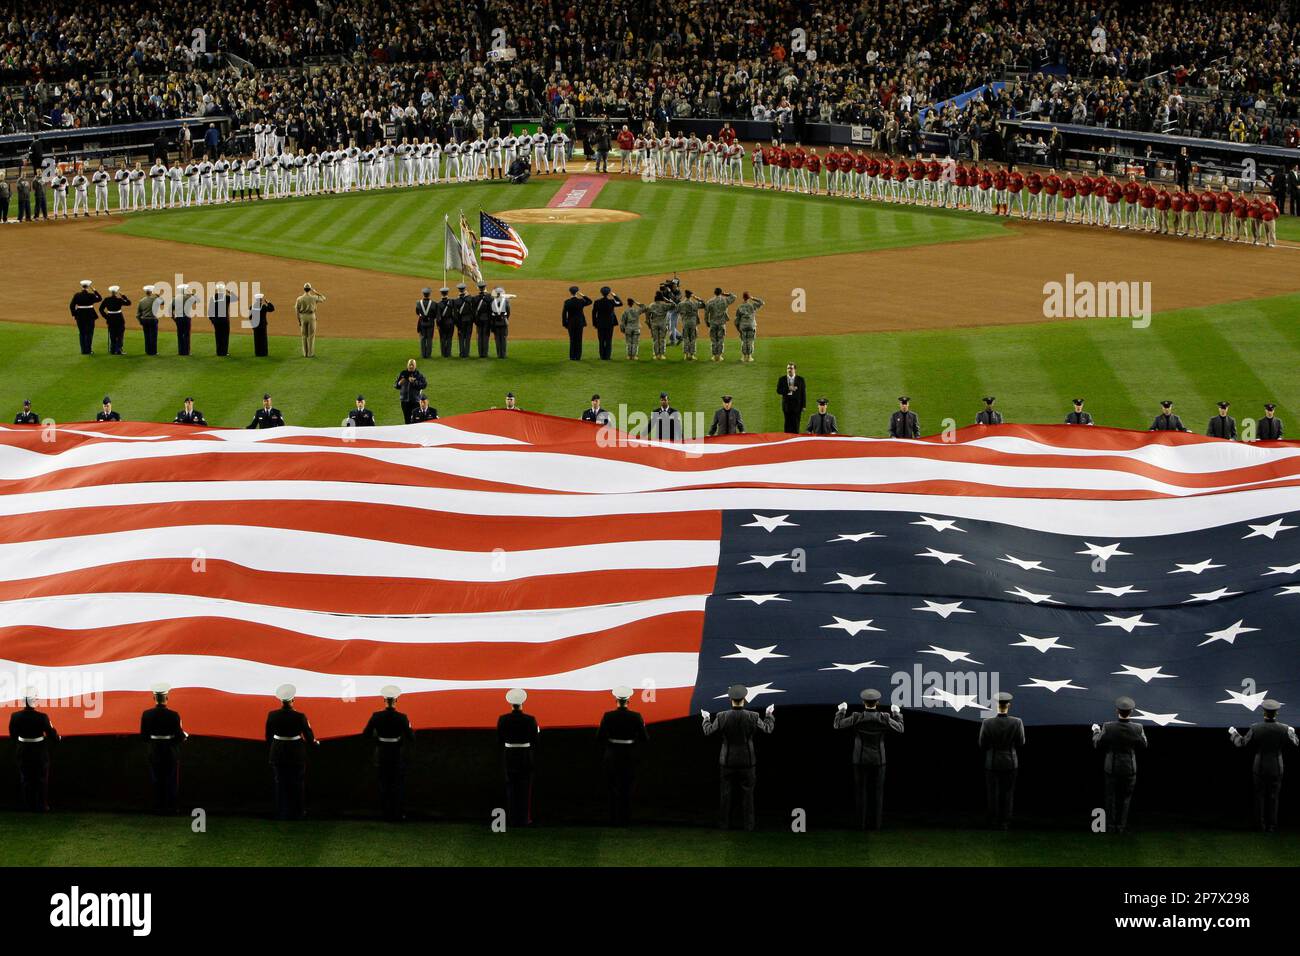 HOme of NEw York Yankees Store Editorial Photo - Image of patriotic, nred:  172802856